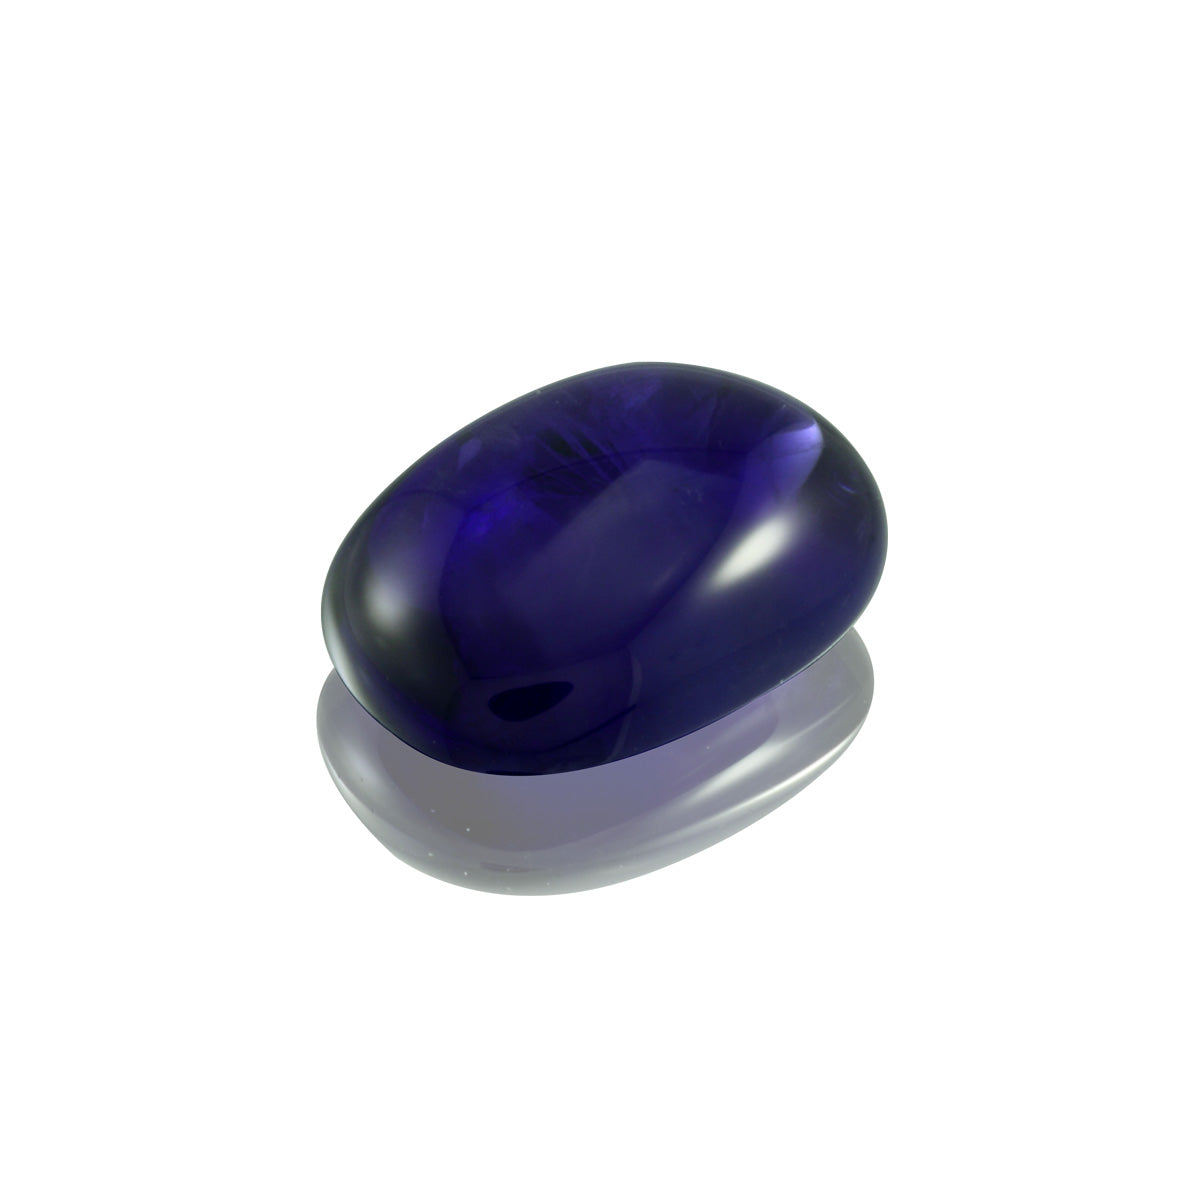 21.72ct Fine Burmese Royal Blue Sapphire Cabochon Certified Unheated - MAYS